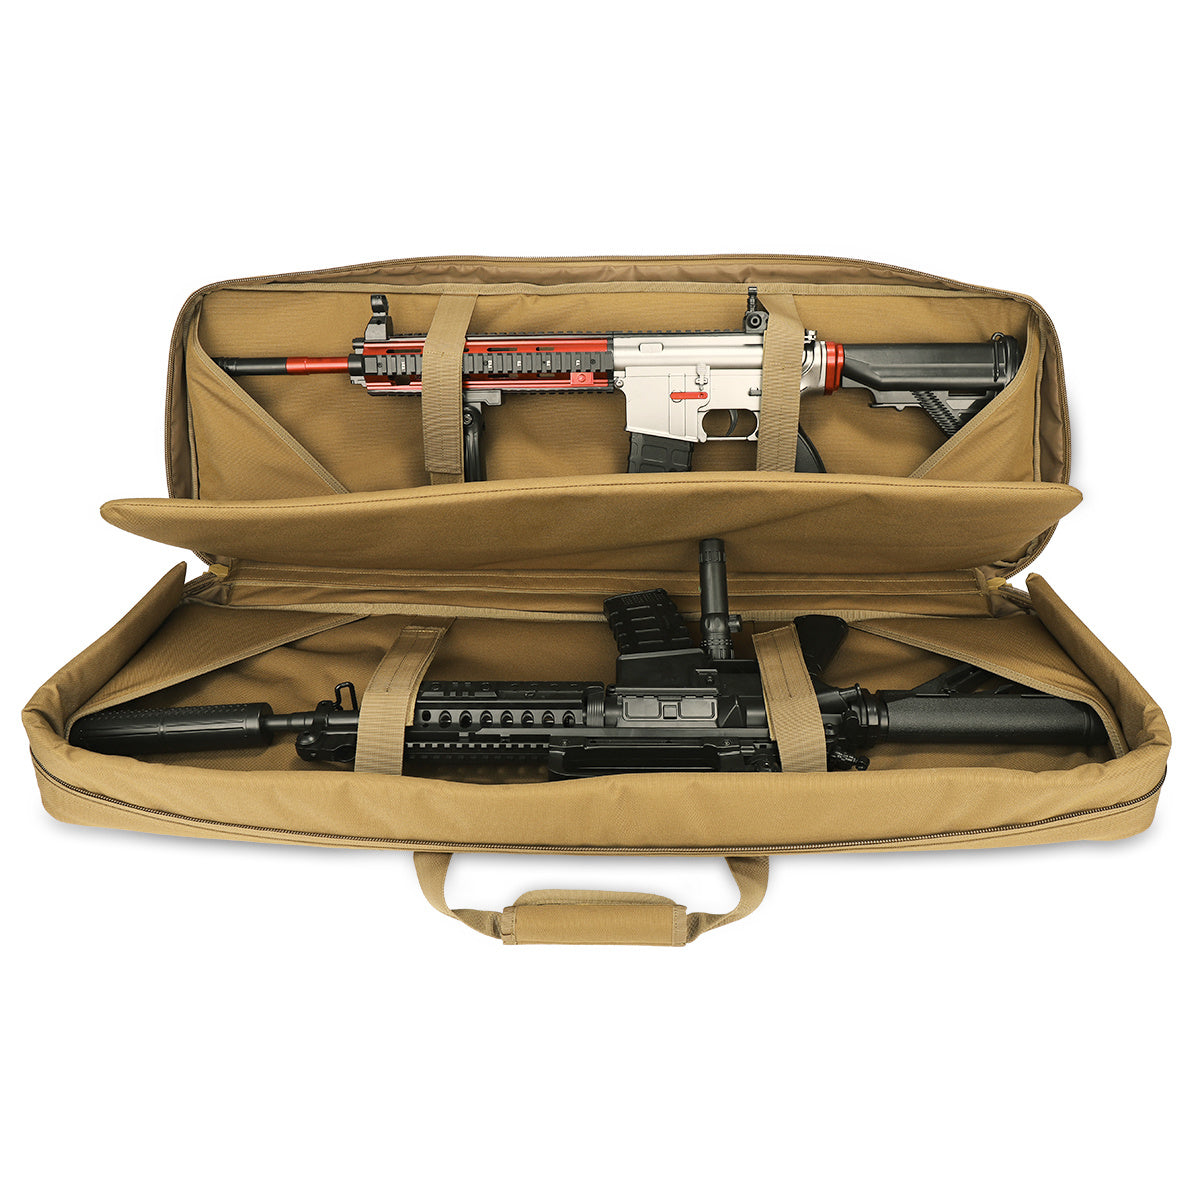 A customizable Tactical Rifle Case with durable construction on a white background.